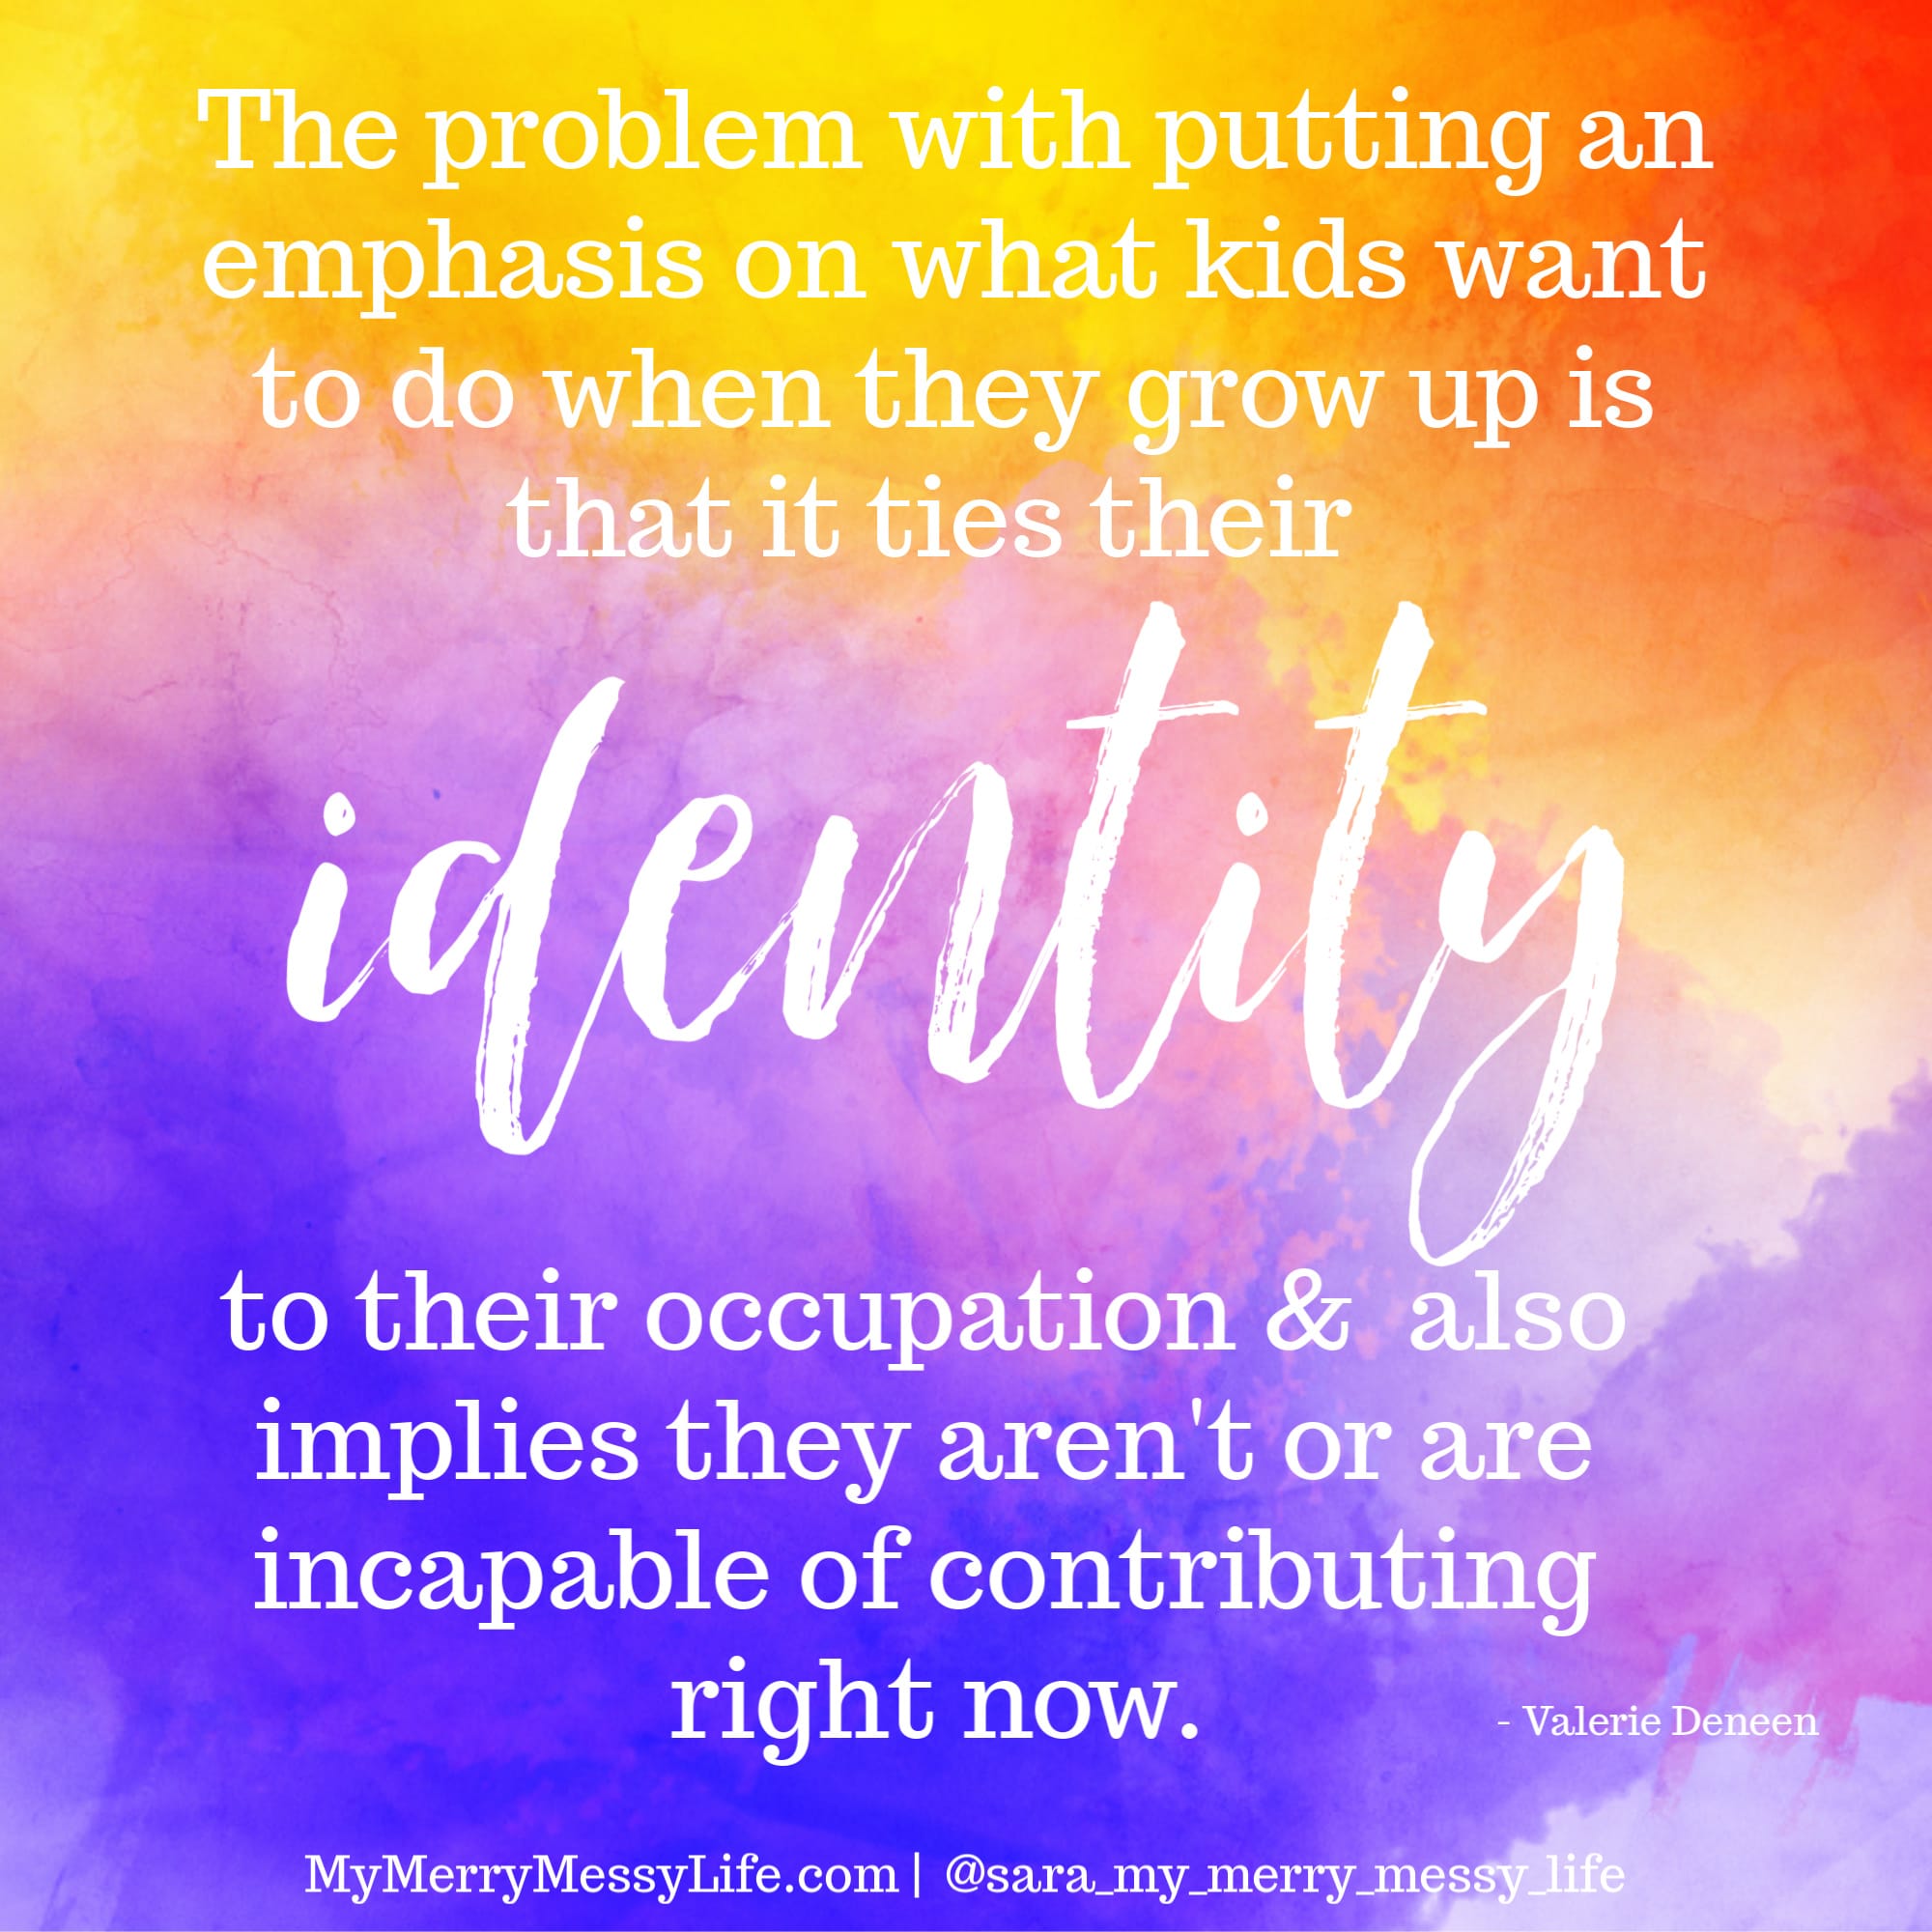 The problem with putting an emphasis on what kids want to do when they grow up is that it ties their identity to their occupation and also implies that they aren't, or are incapable of, contributing right now. - Valerie Deneen on The Merry Messy Moms Show Podcast